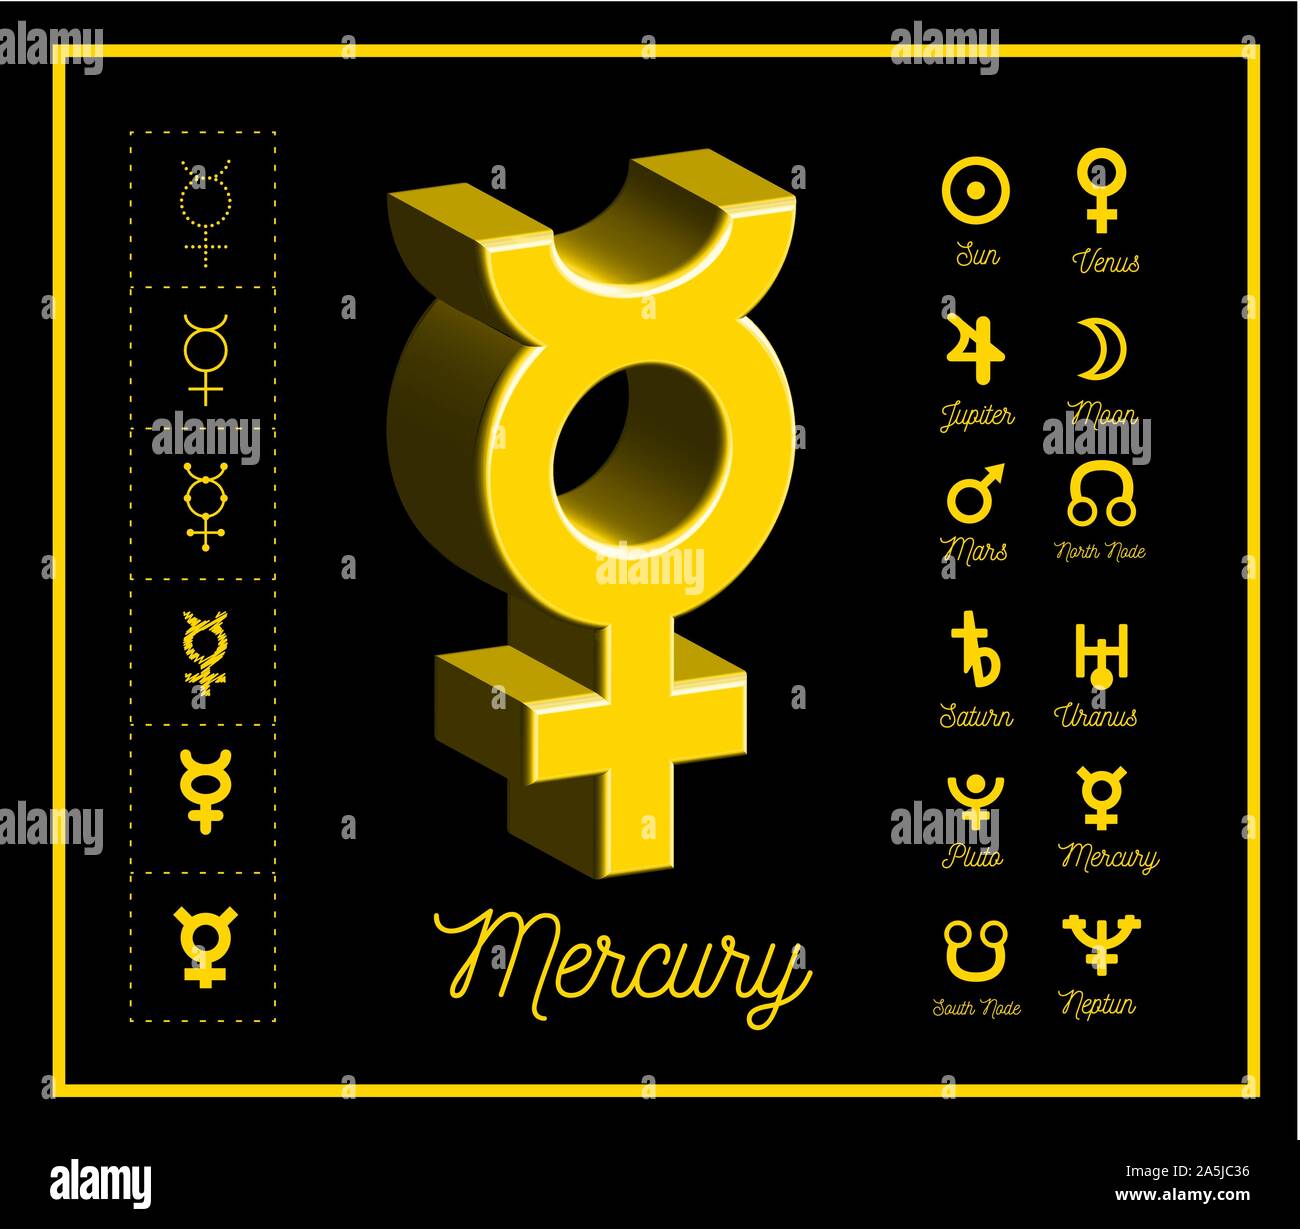 Mercury planet sign with other astrological symbols of the planets on black background. Vector Stock Vector